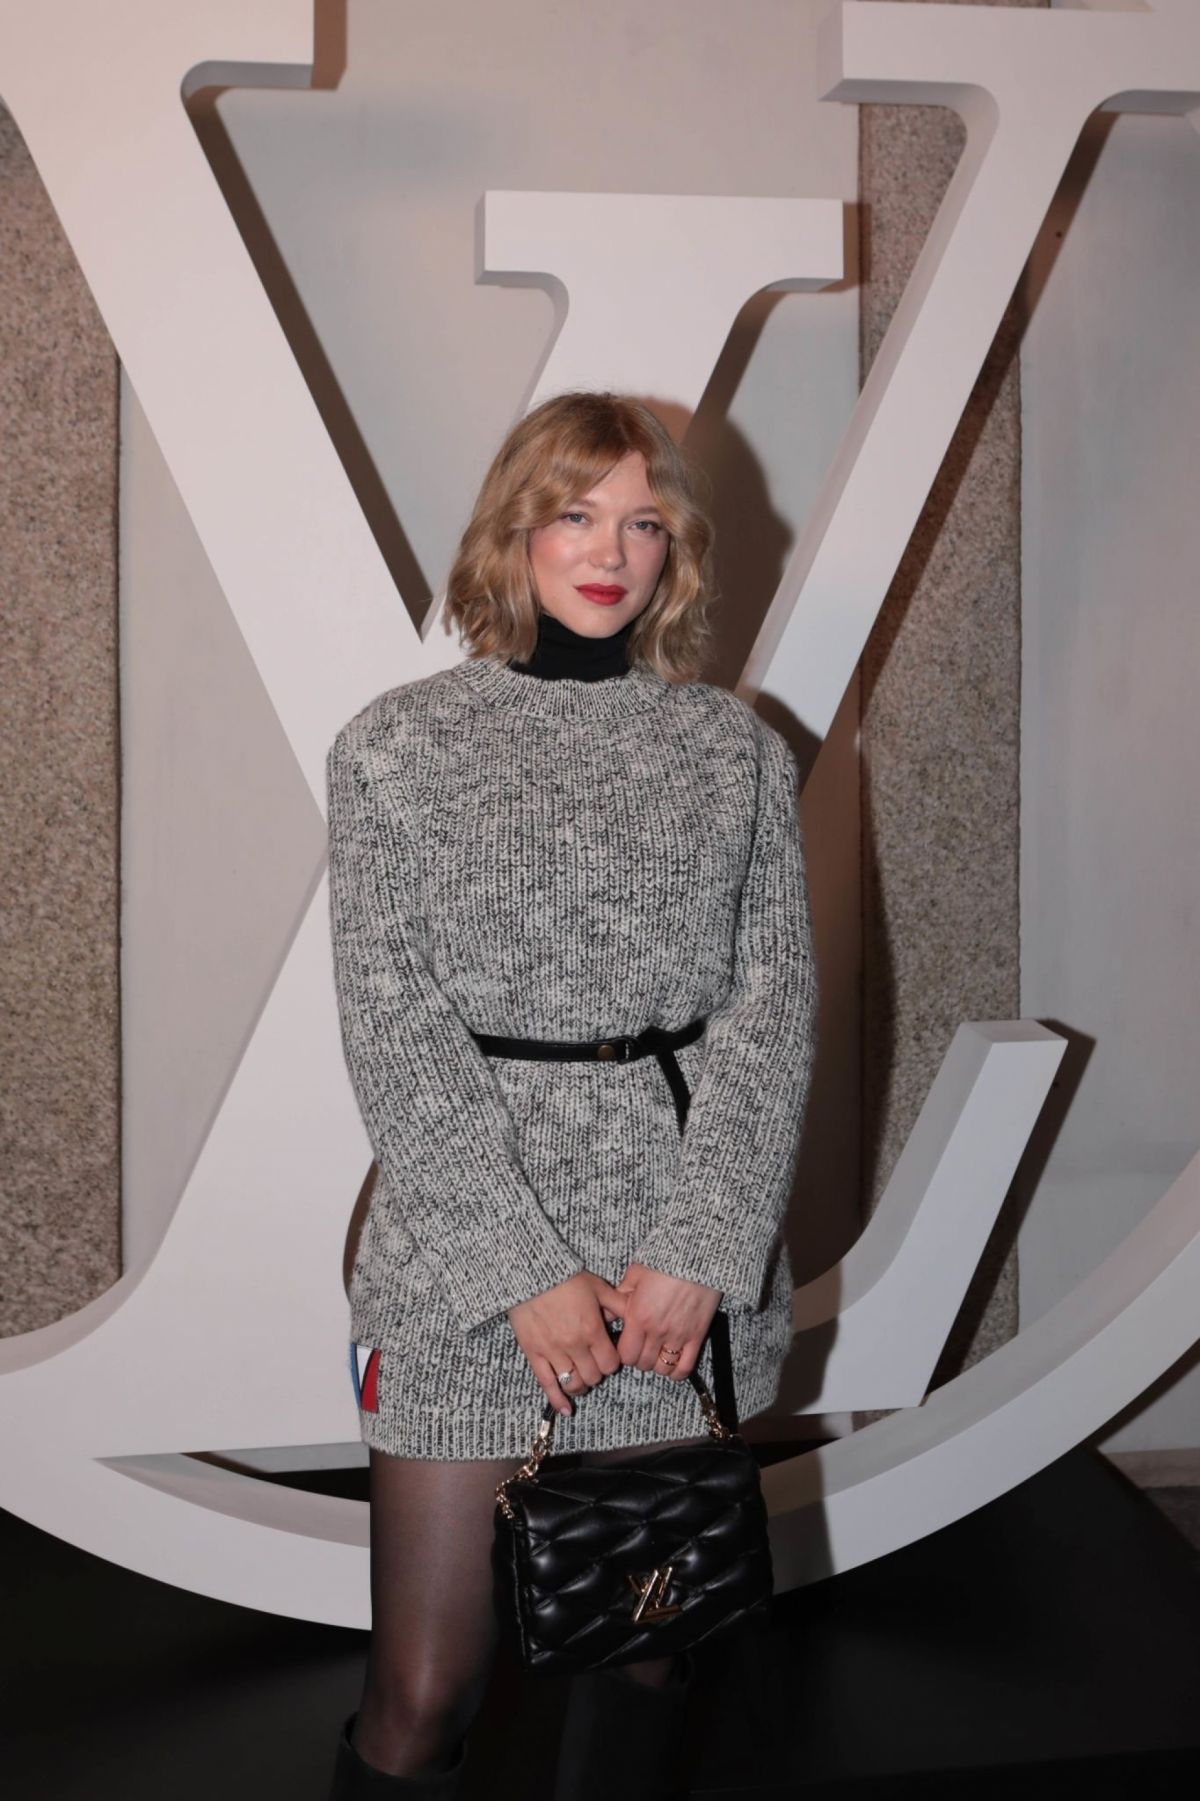 Lea Seydoux Fronts 'Game On' for Louis Vuitton Cruise Lensed by